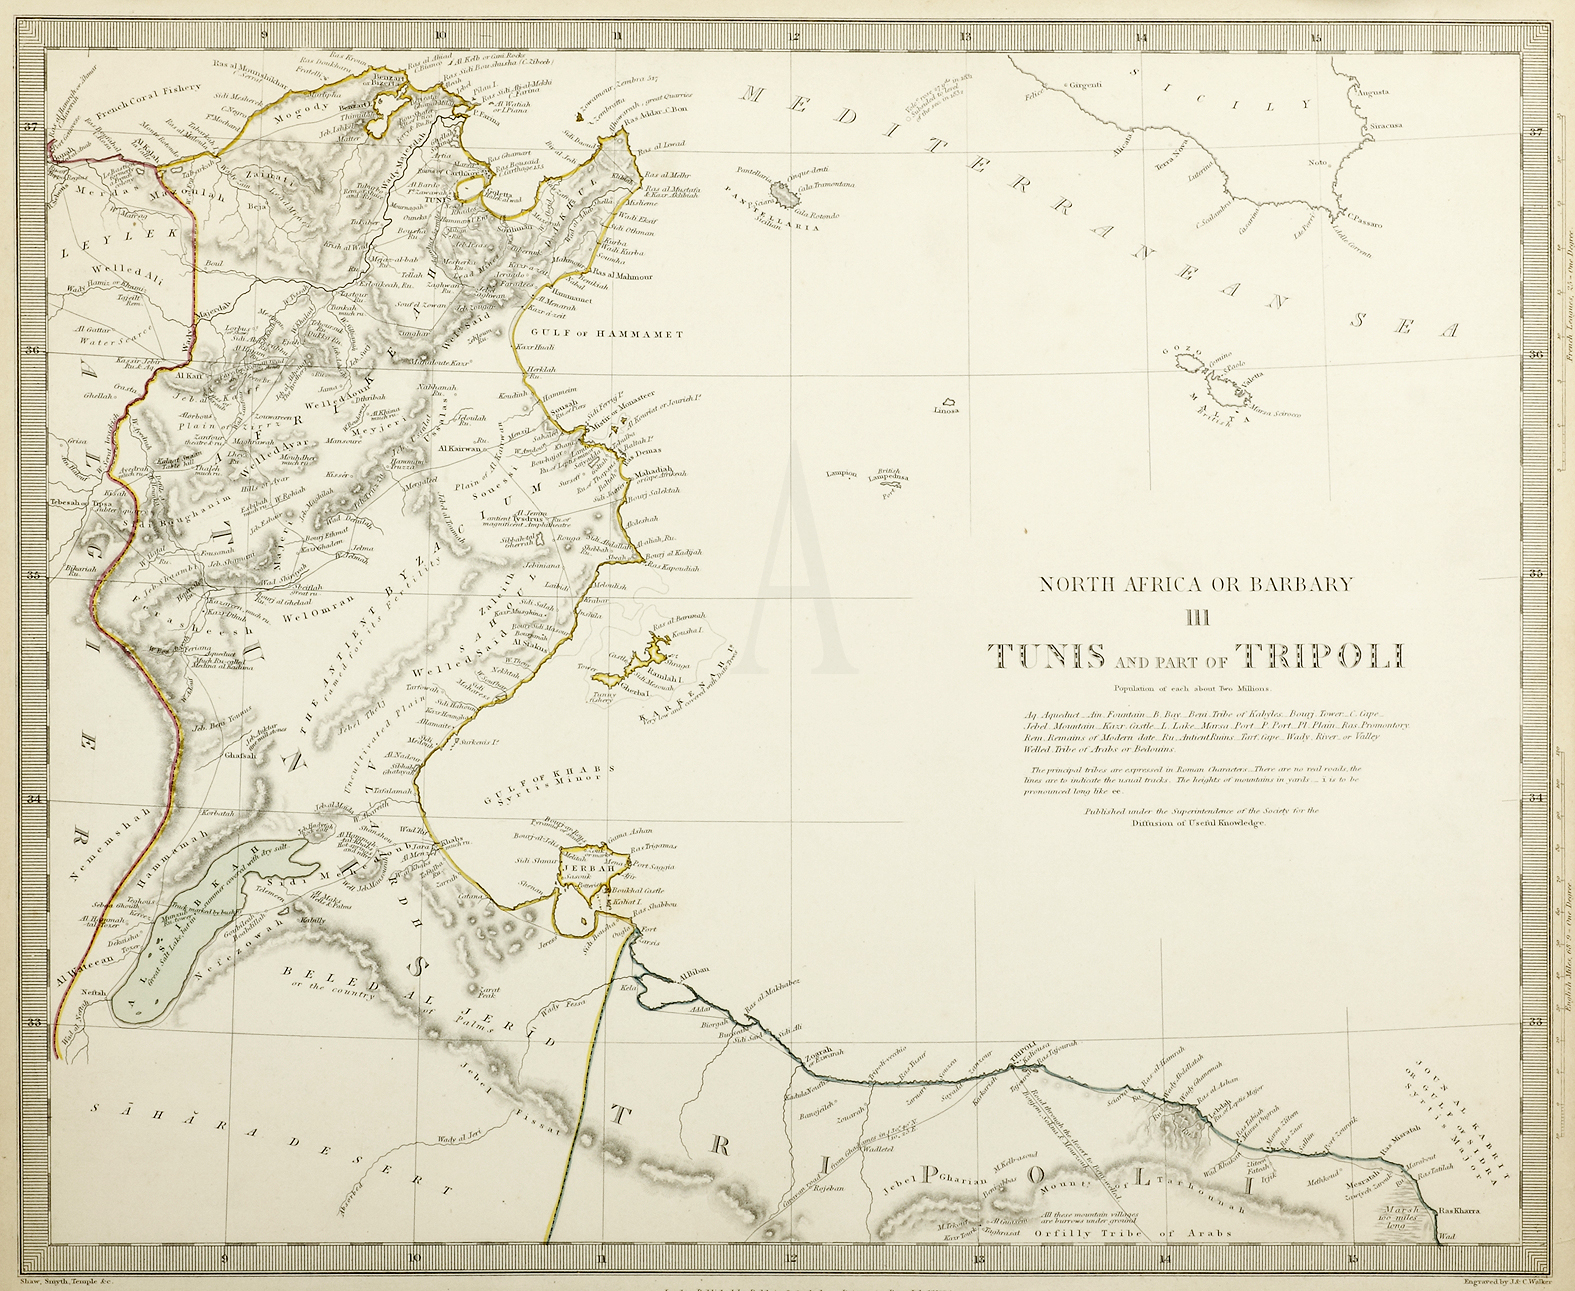 Tunis and part of Tripoli - Antique Print from 1859